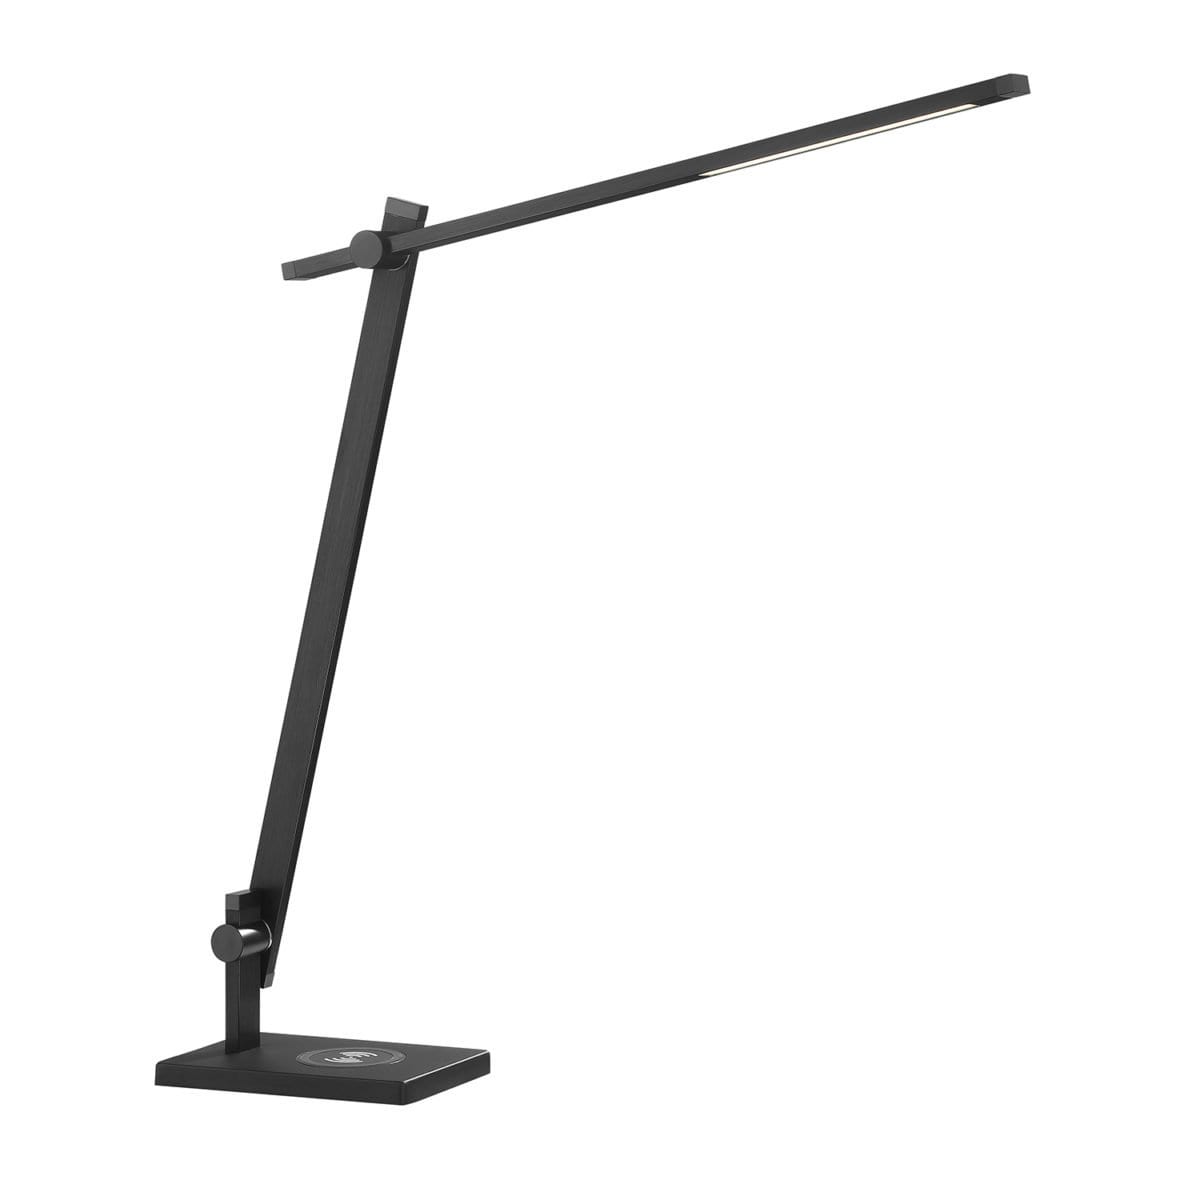 148 PTL 5017 BLK
LED Table Lamp with 
phone charger available in 
Brushed Aluminum or Black
Regular Price $329.99
Sale Price $229.99